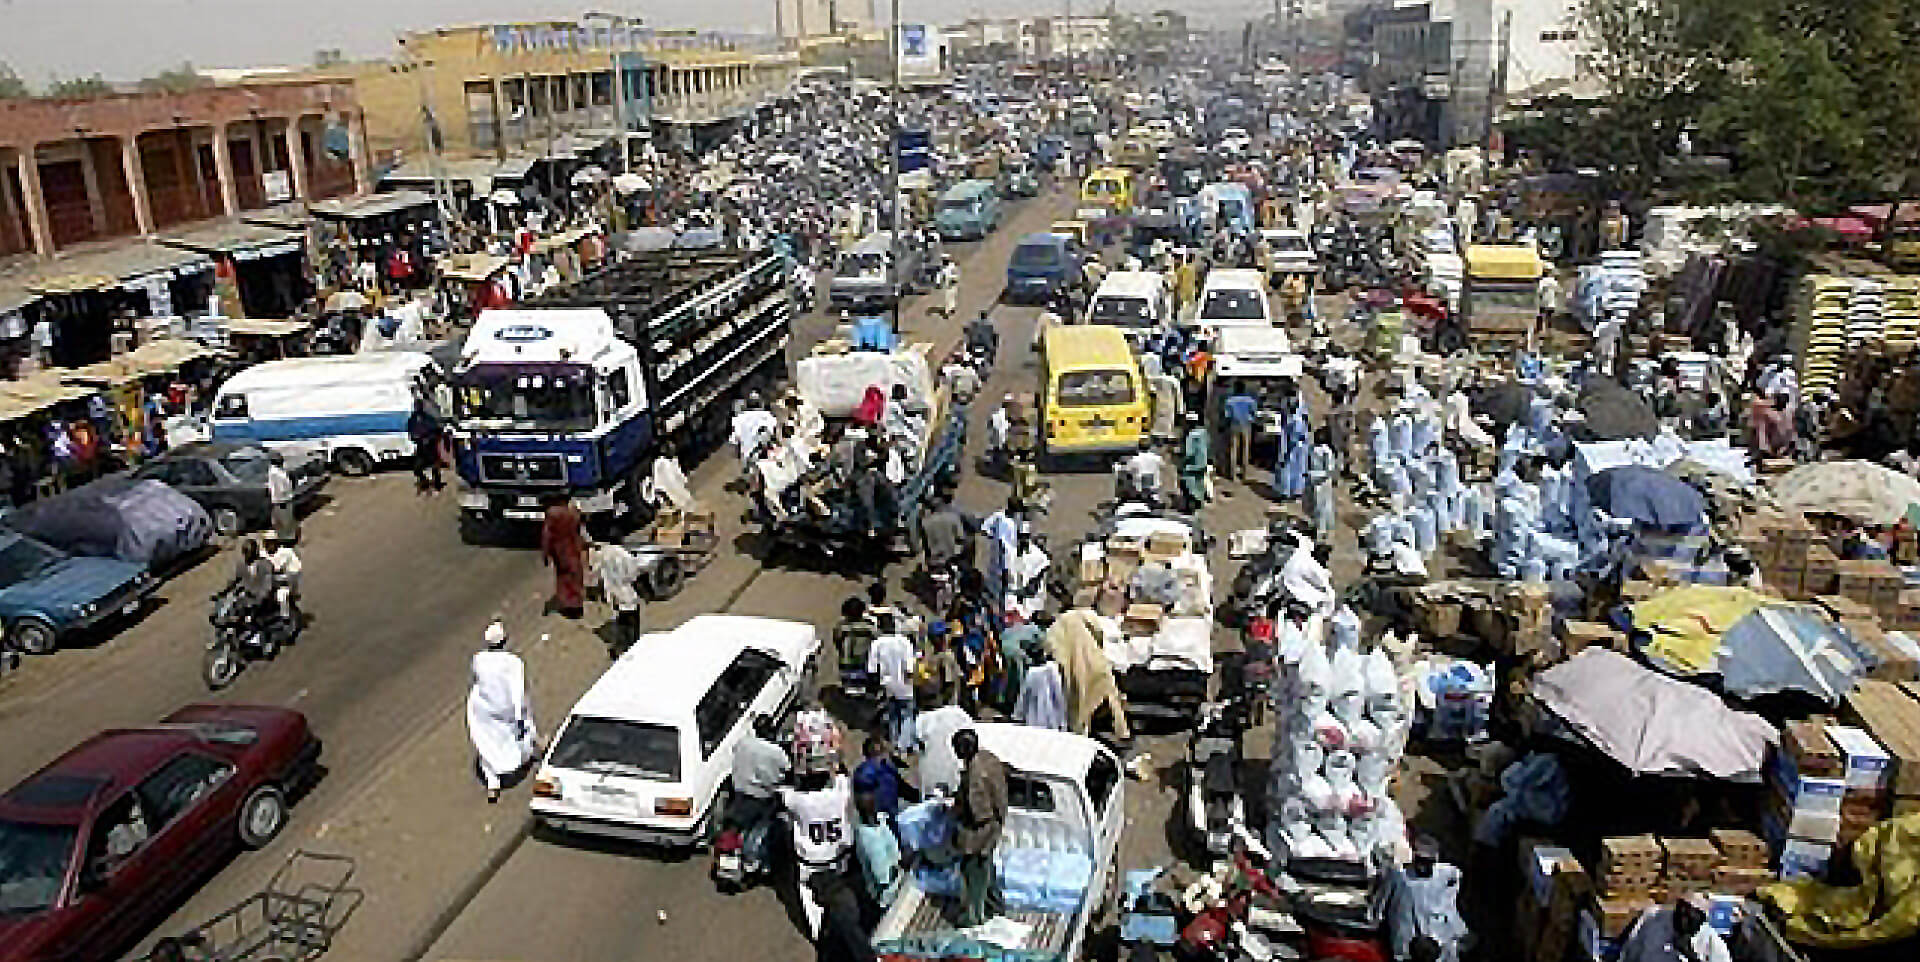 Typical urban environment In Kano, Nigeria